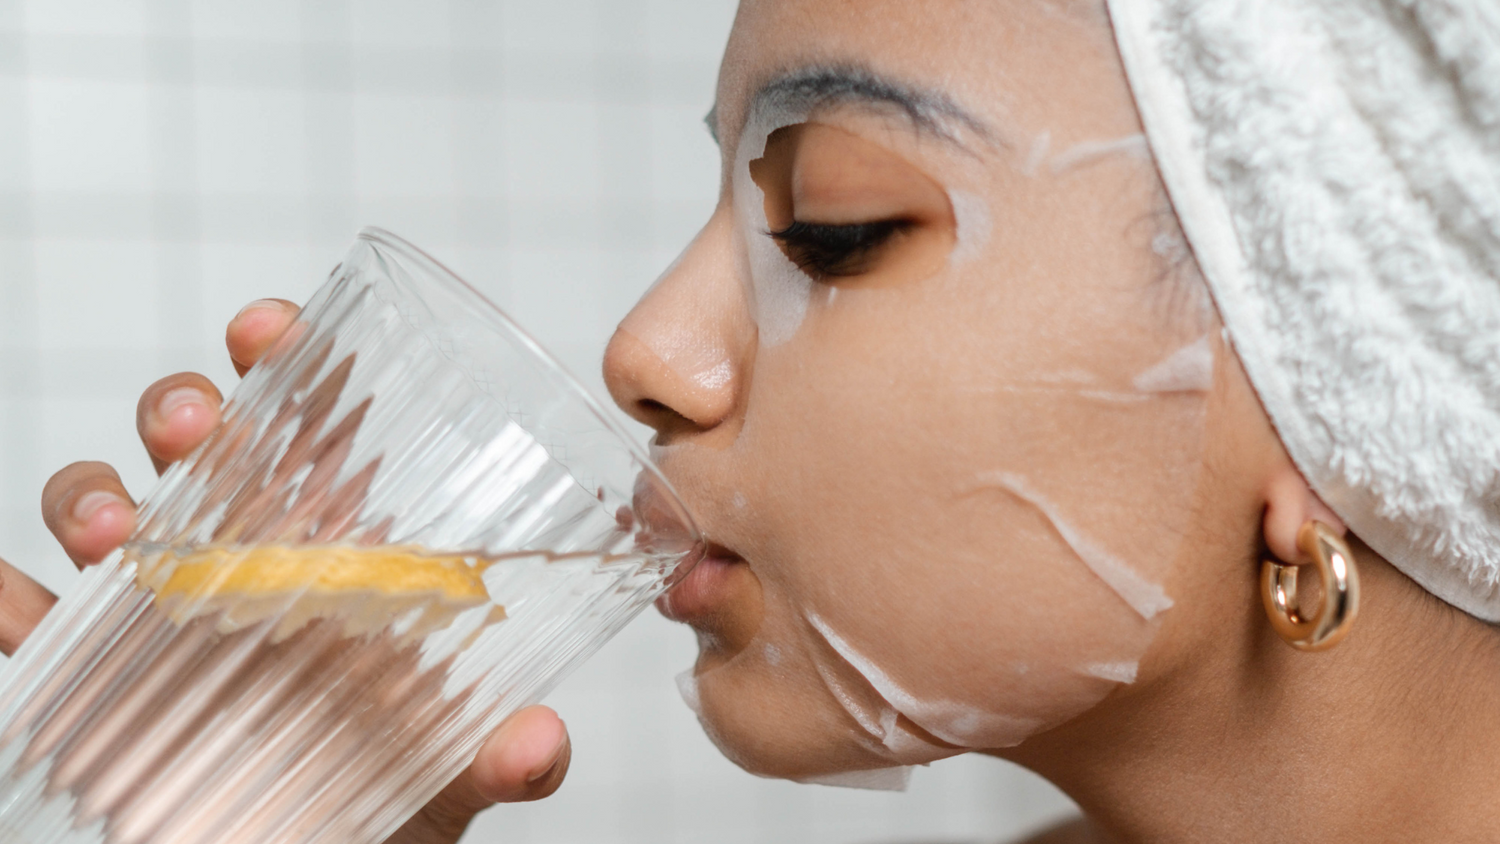 DRINK YOURSELF BEAUTIFUL - Can drinking water really make your skin glow?